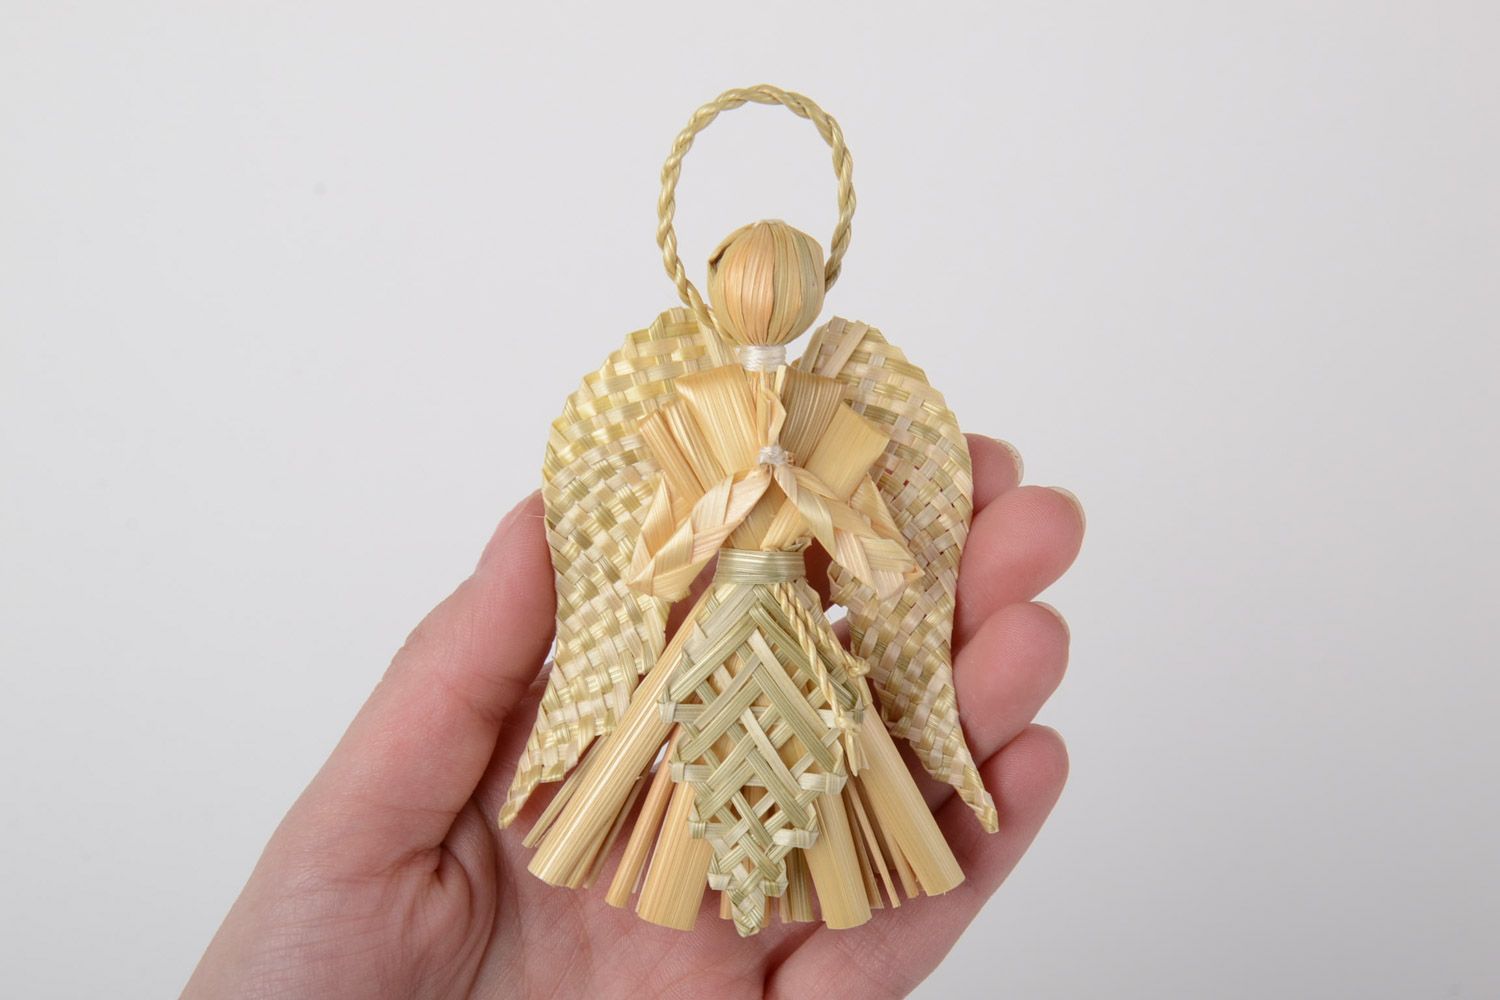 Small handmade wall hanging figurine of guardian angel woven of natural straw photo 5